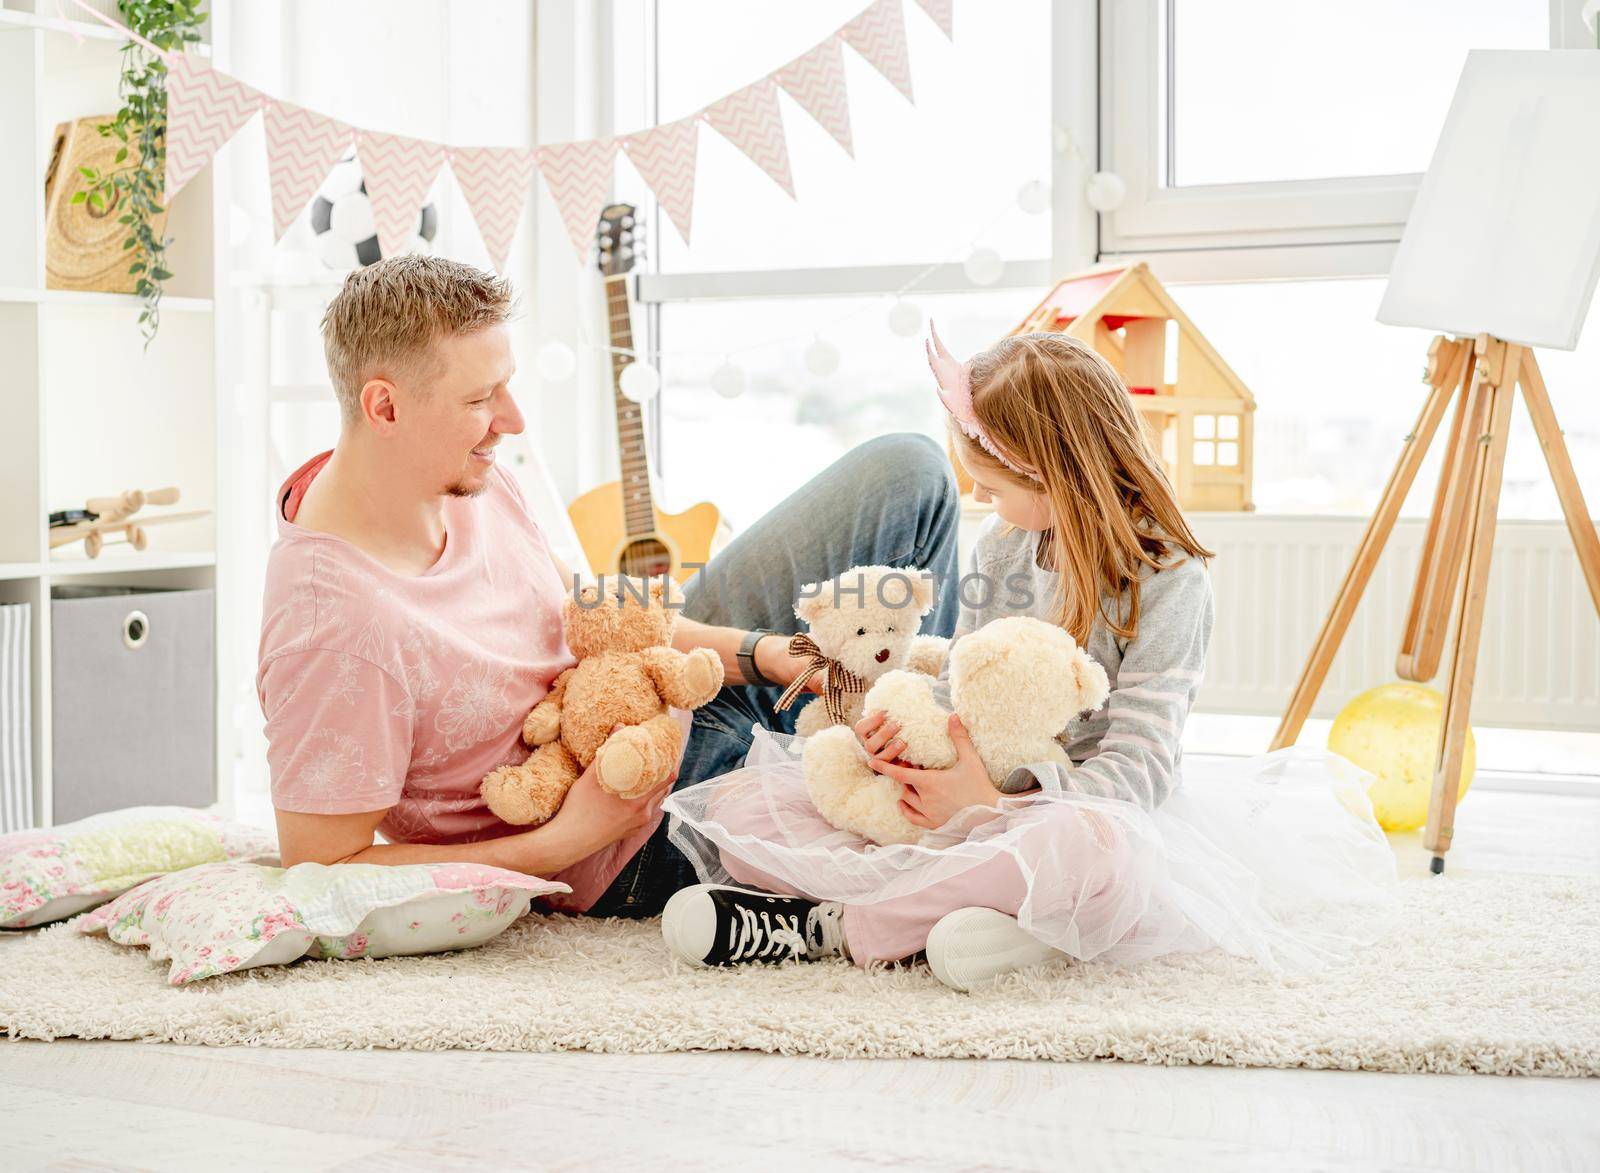 Cute little princess playing with teddy bears with smiling father in children's room